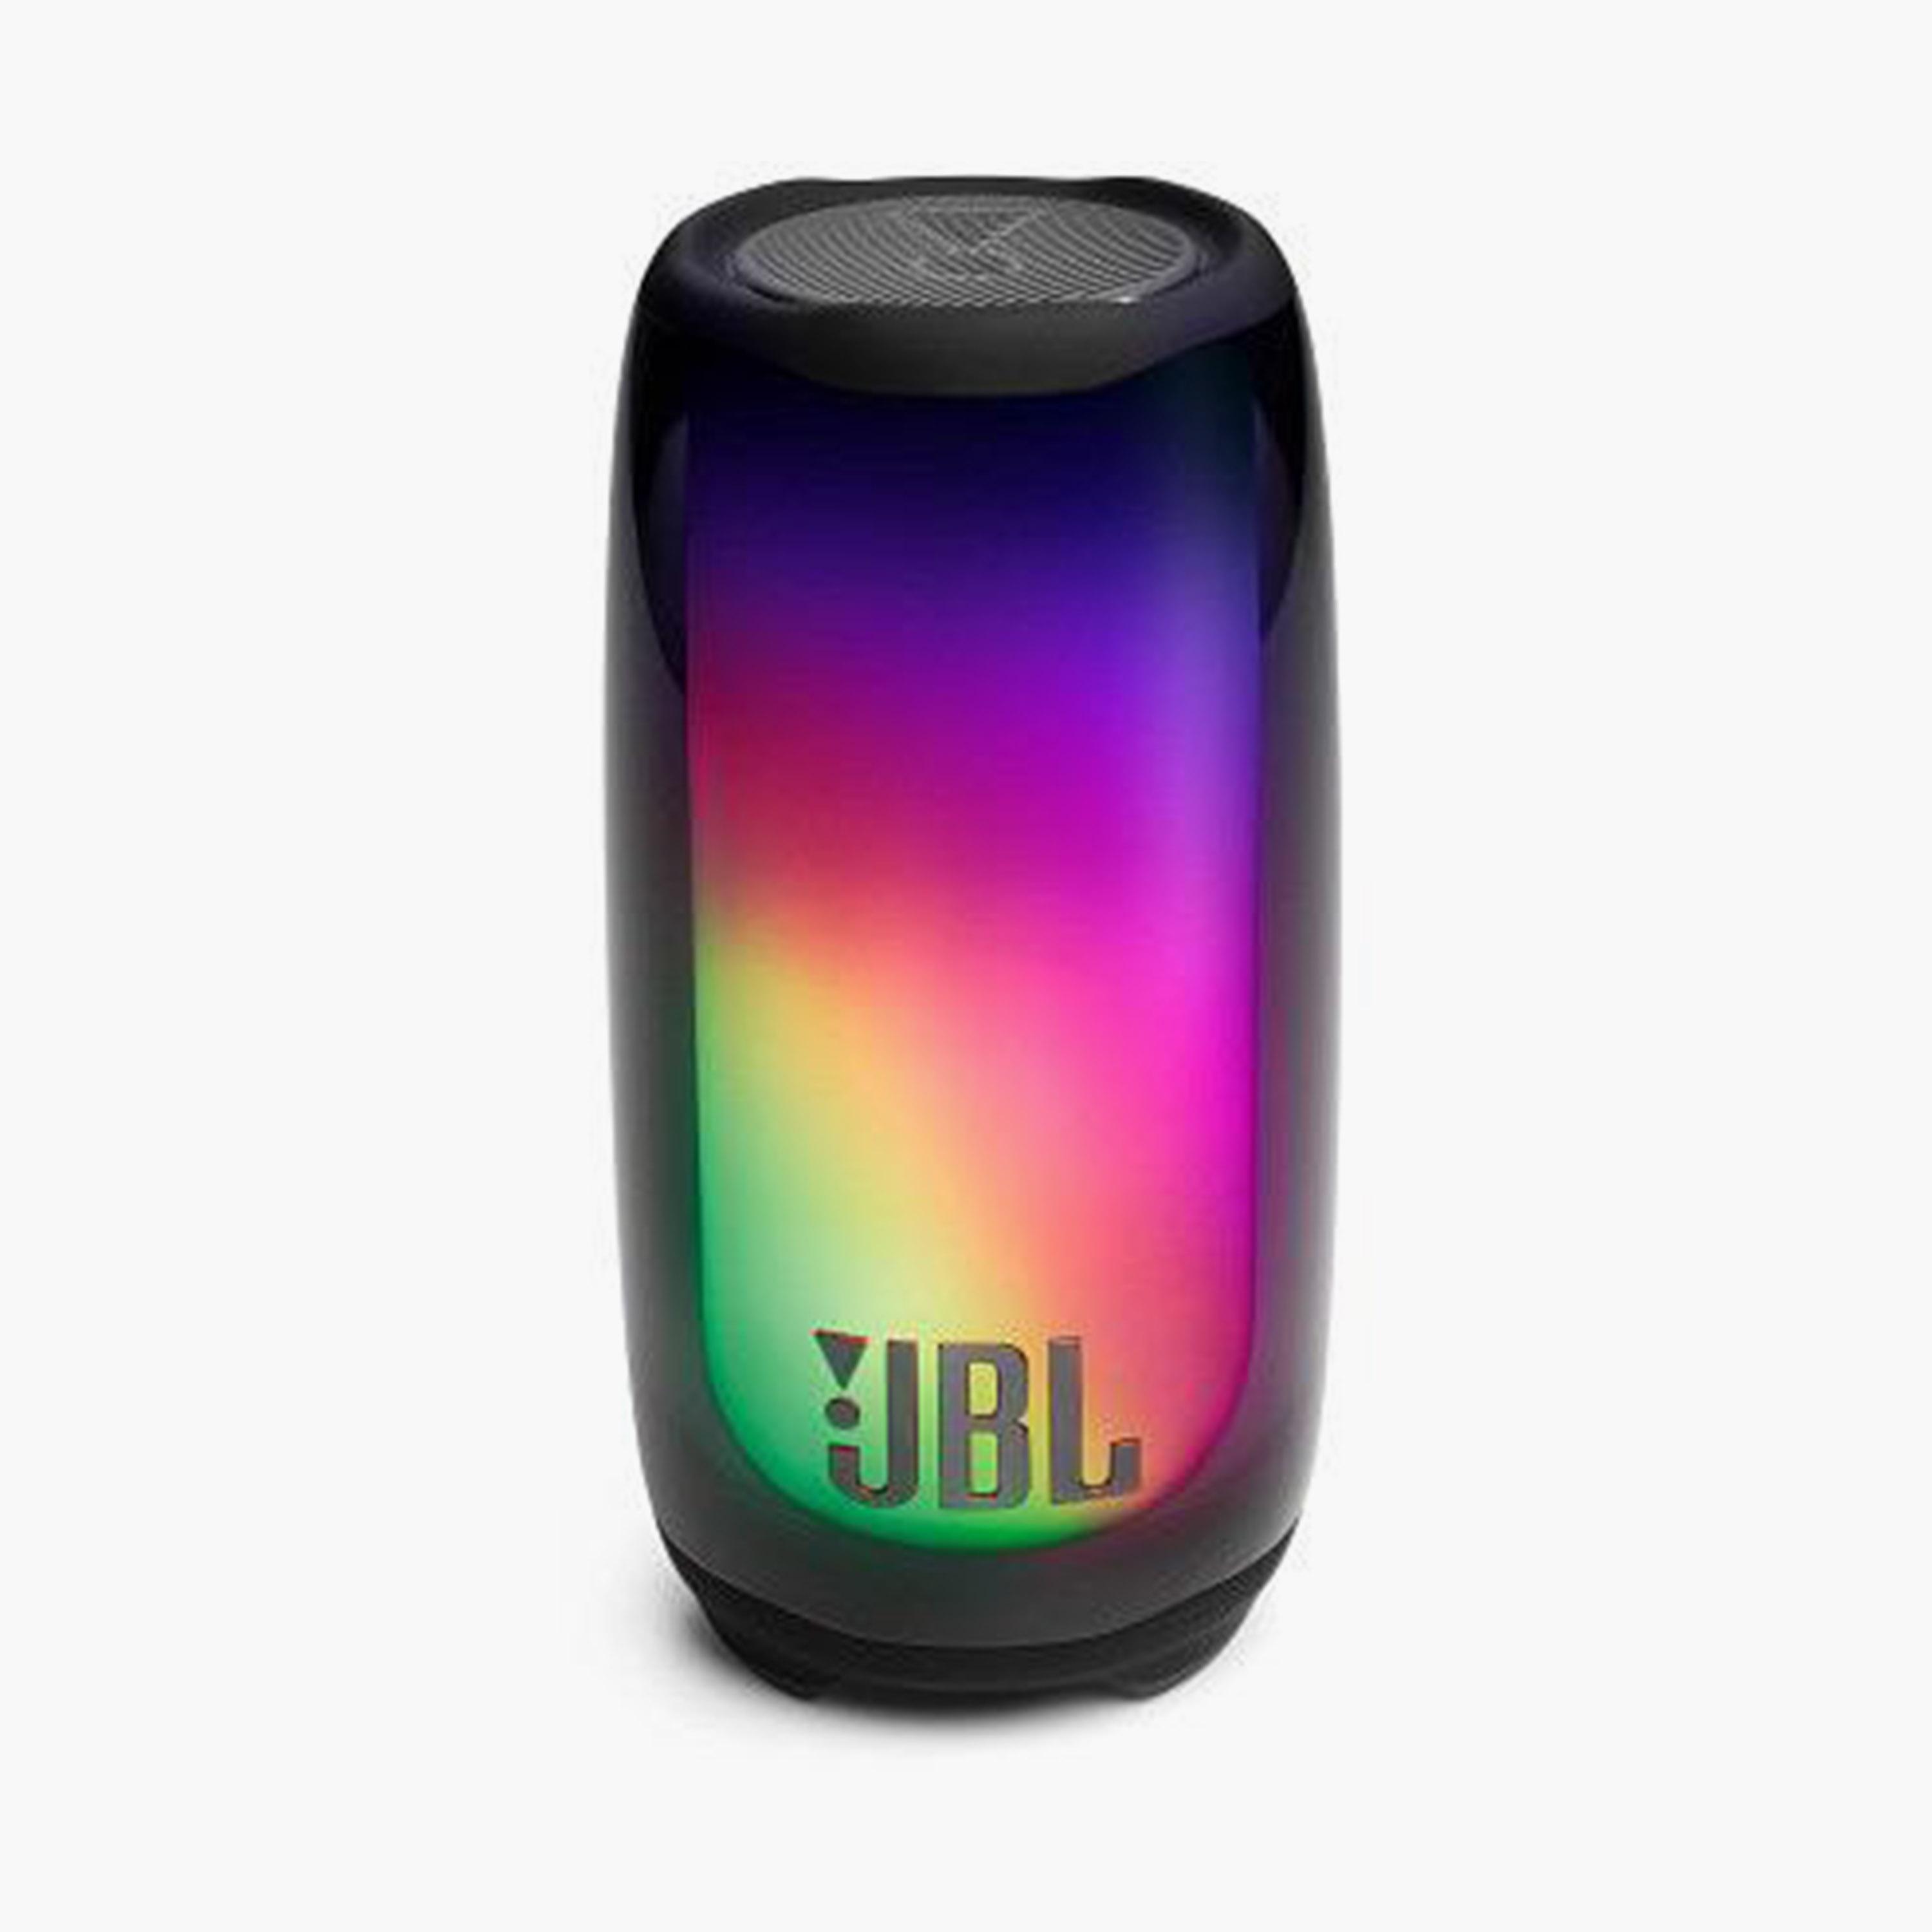 Buy JBL Pulse 5 Portable Bluetooth Speaker with light show